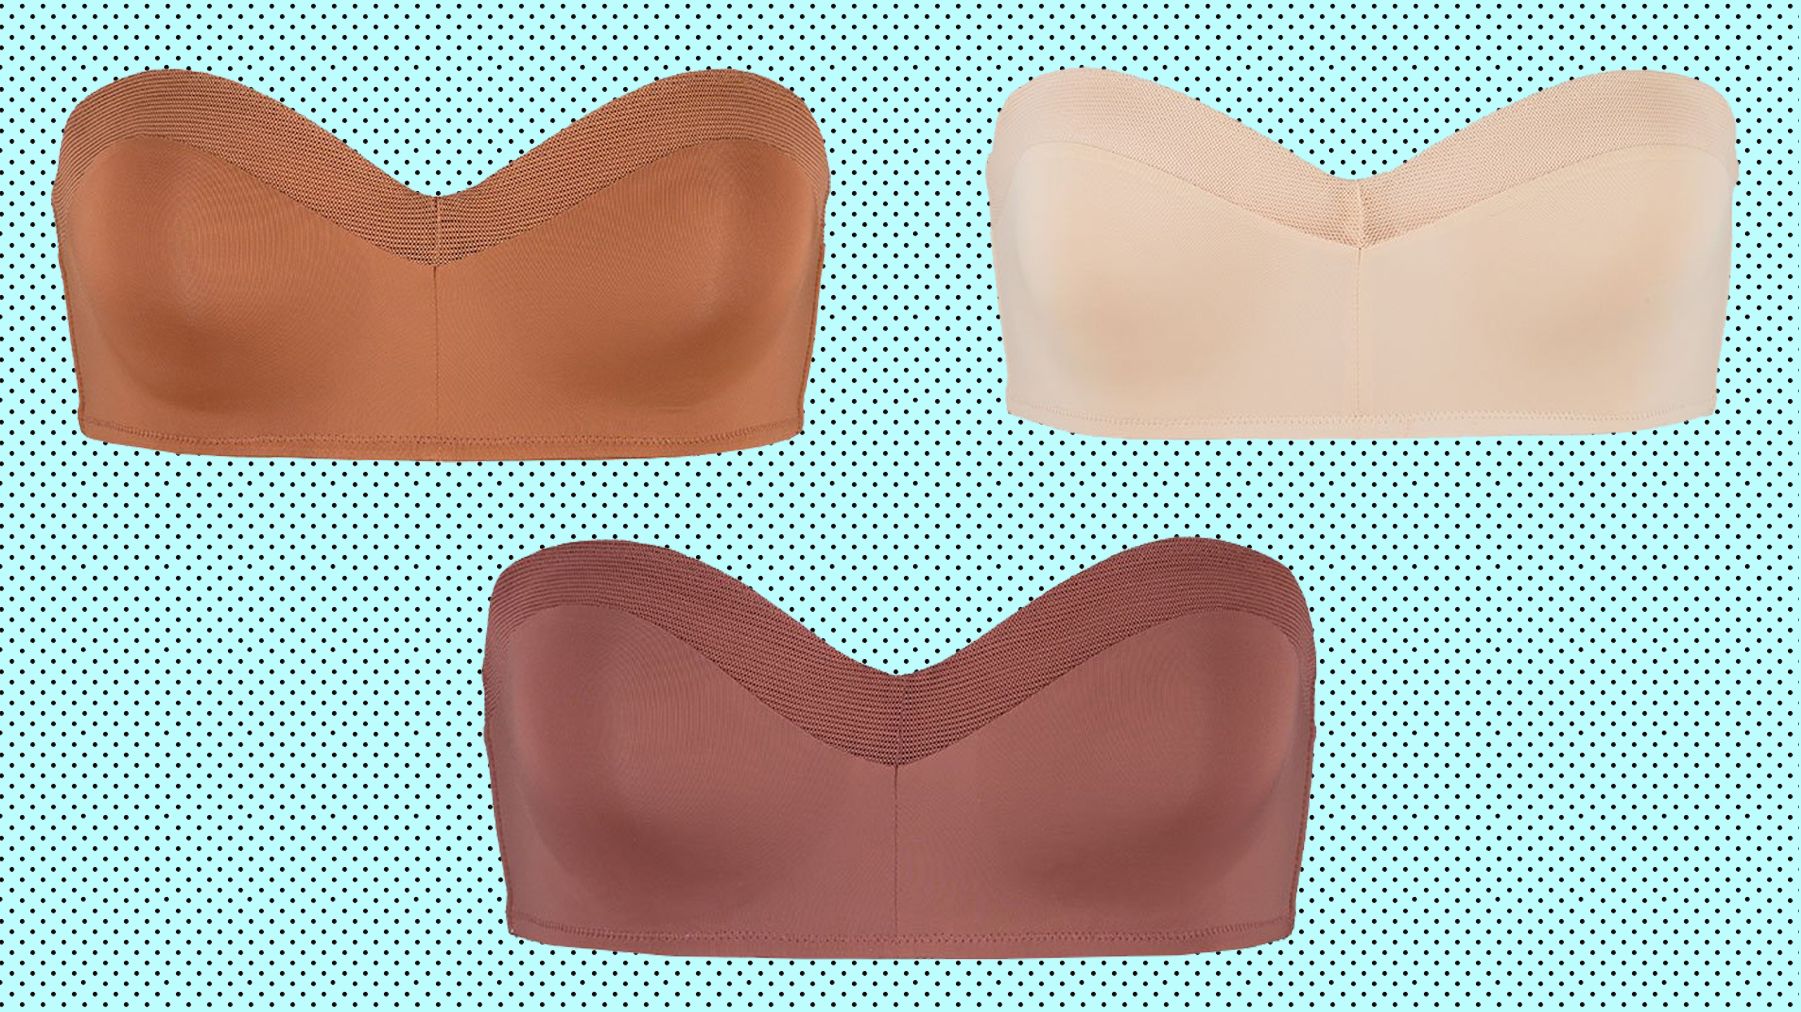 Our Editors Were Shocked That This Wireless Strapless Bra Stays